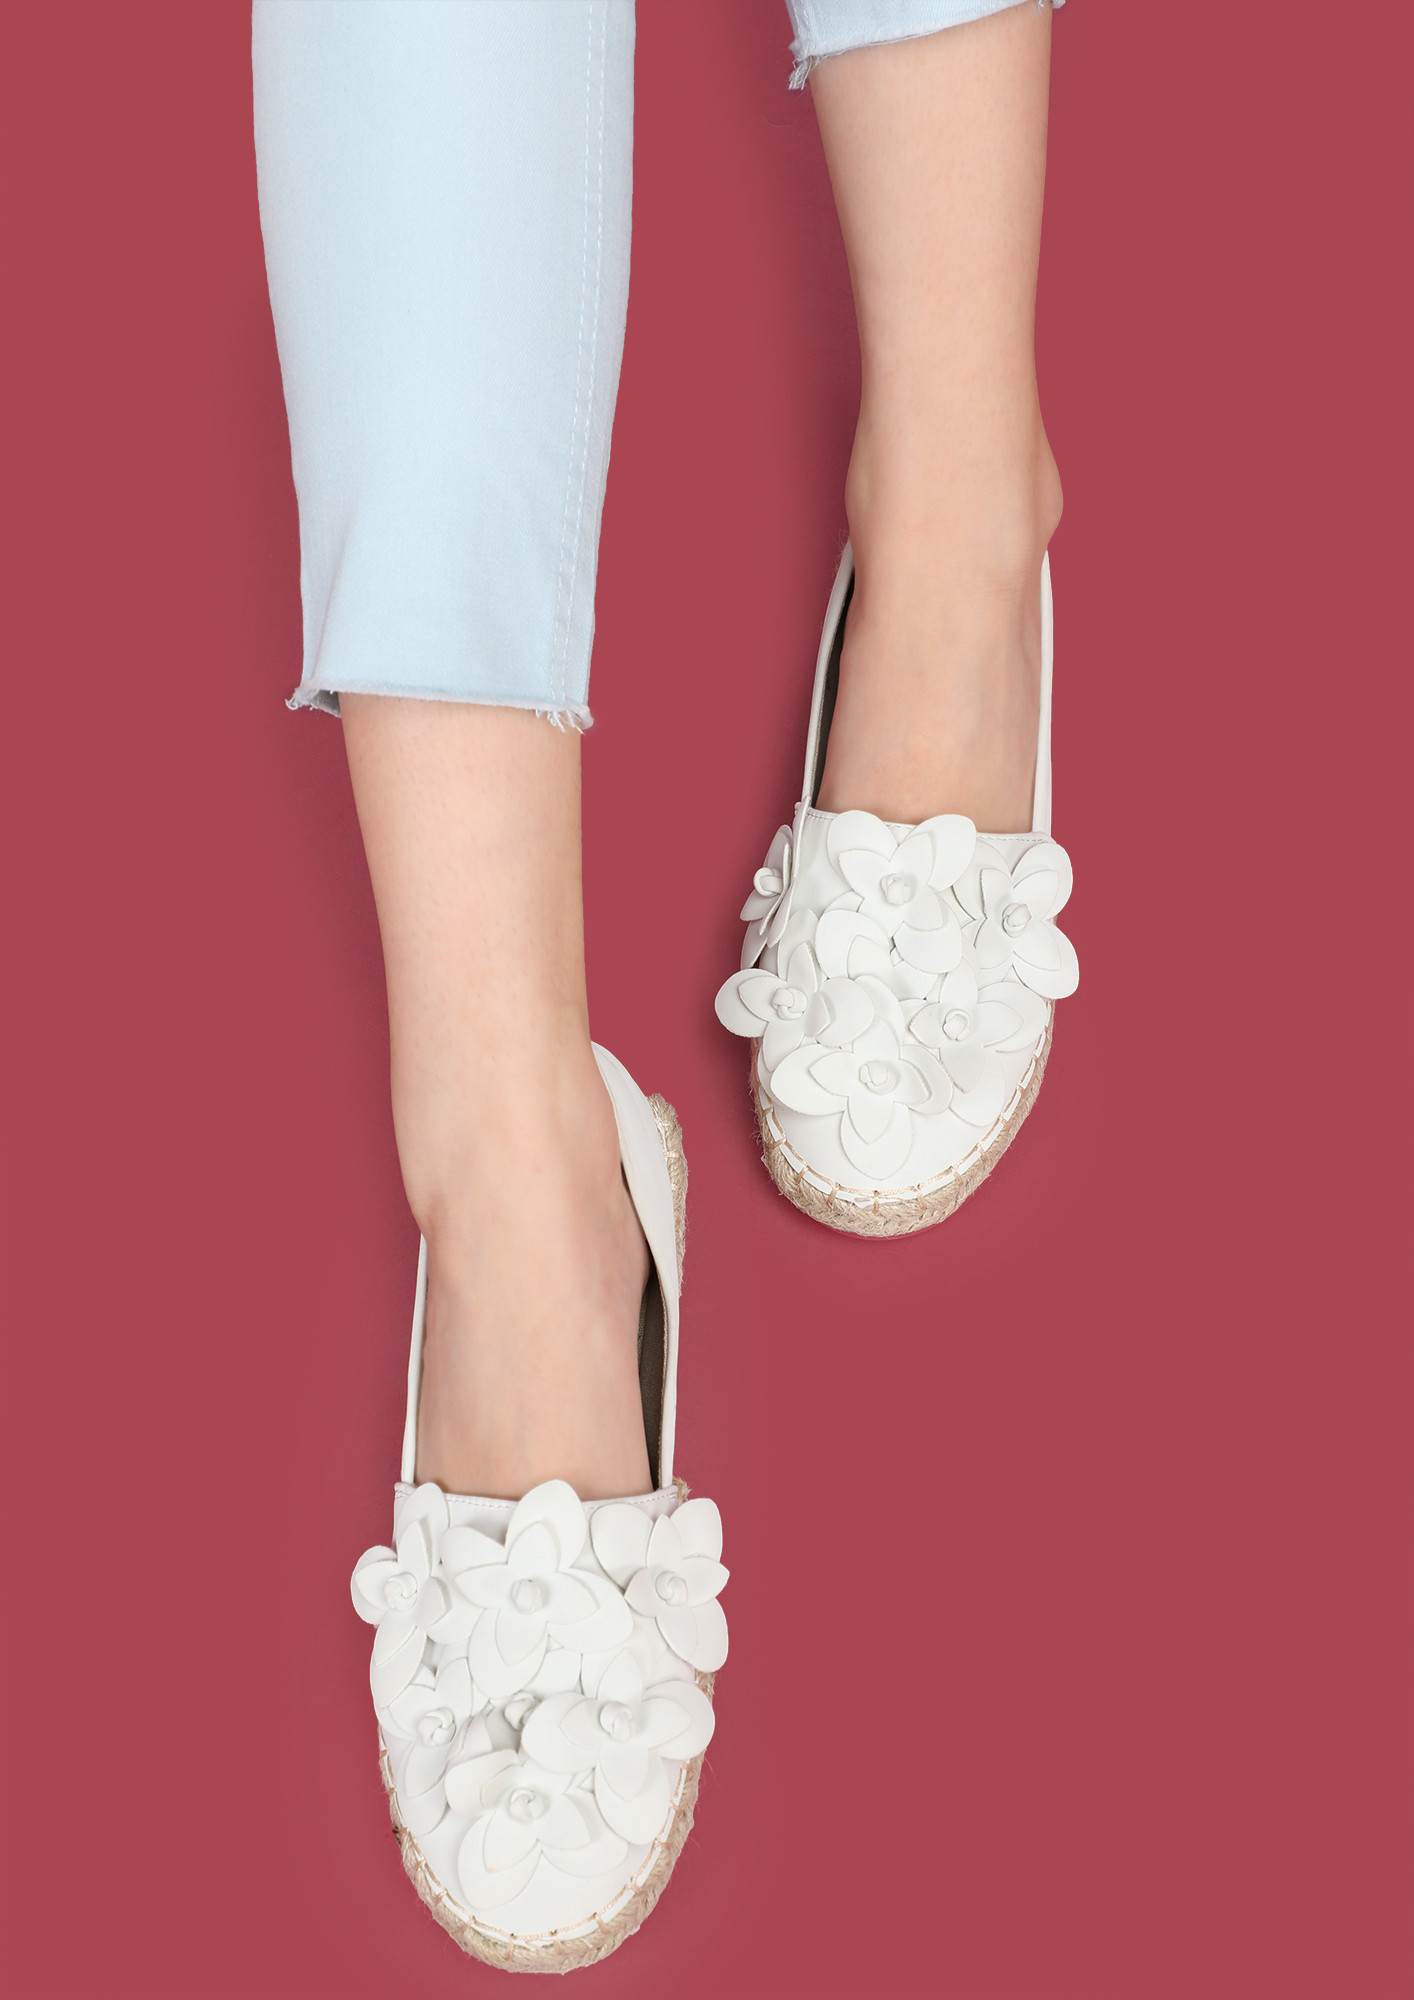 SUMMER SCREAMS WHITE FLAT SHOES